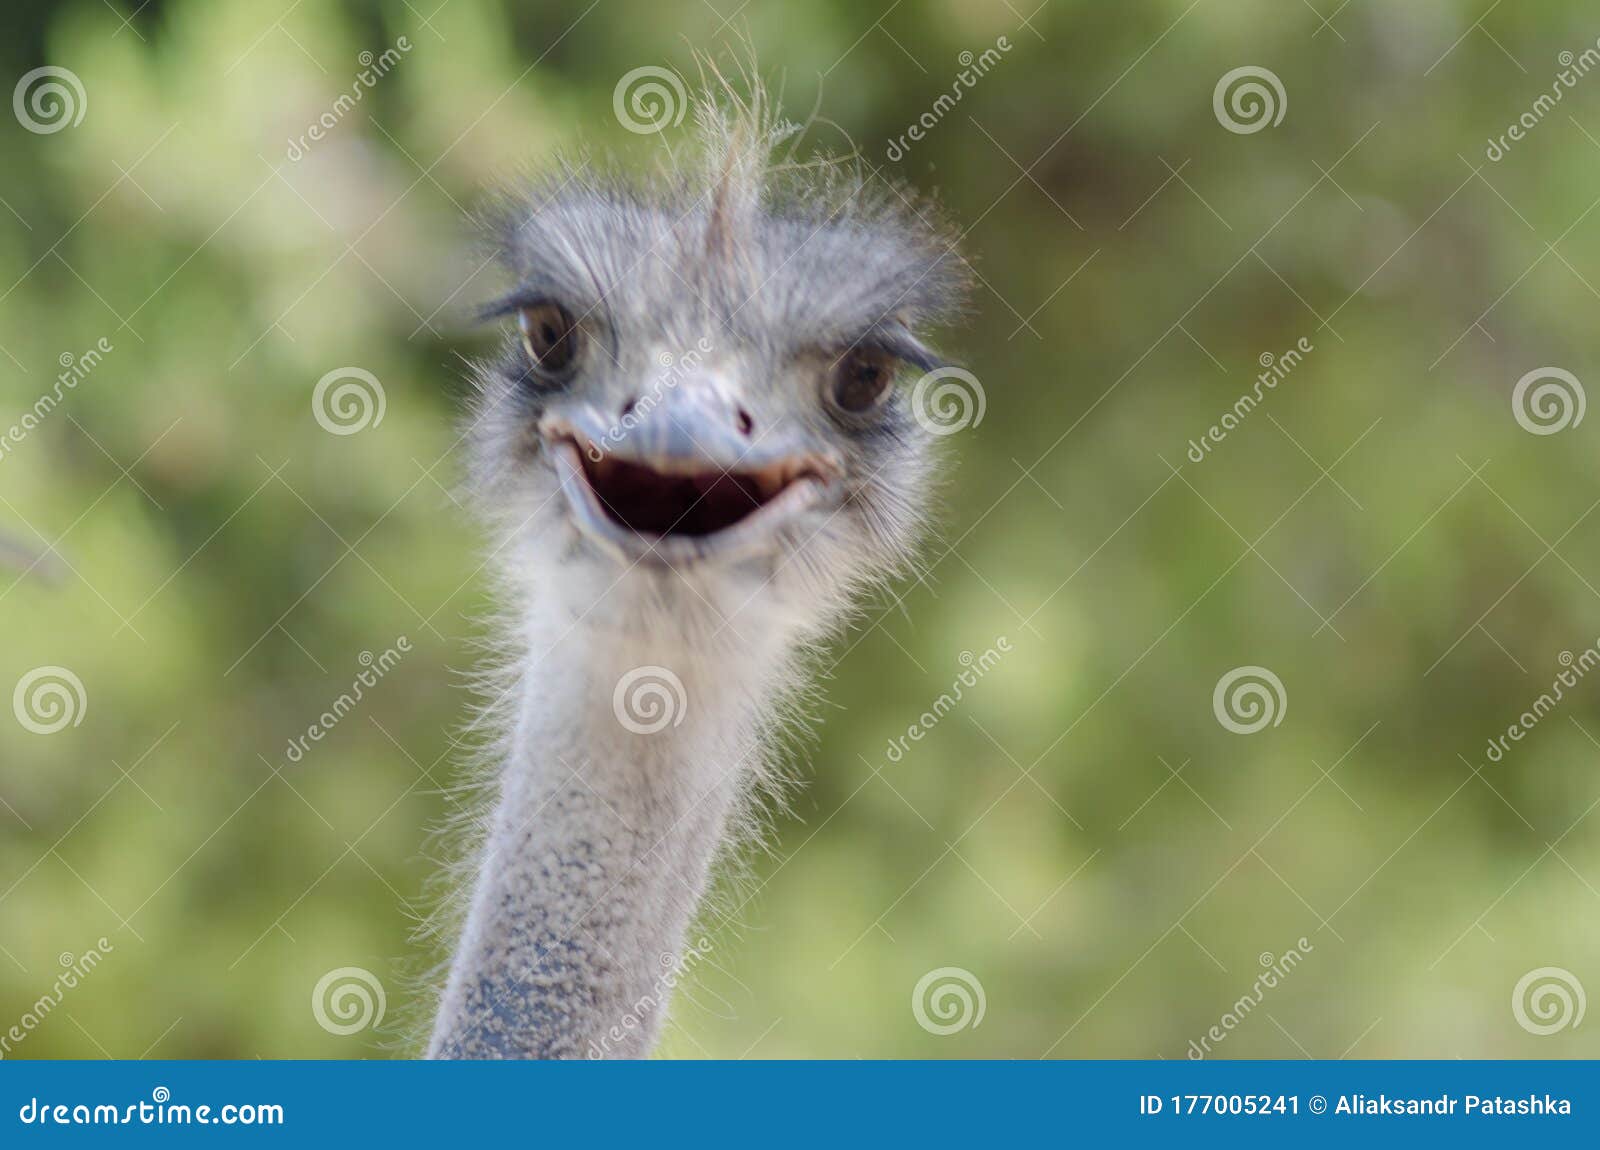 Funny ostrich bird head stock image. Image of neck, outdoors - 177005241